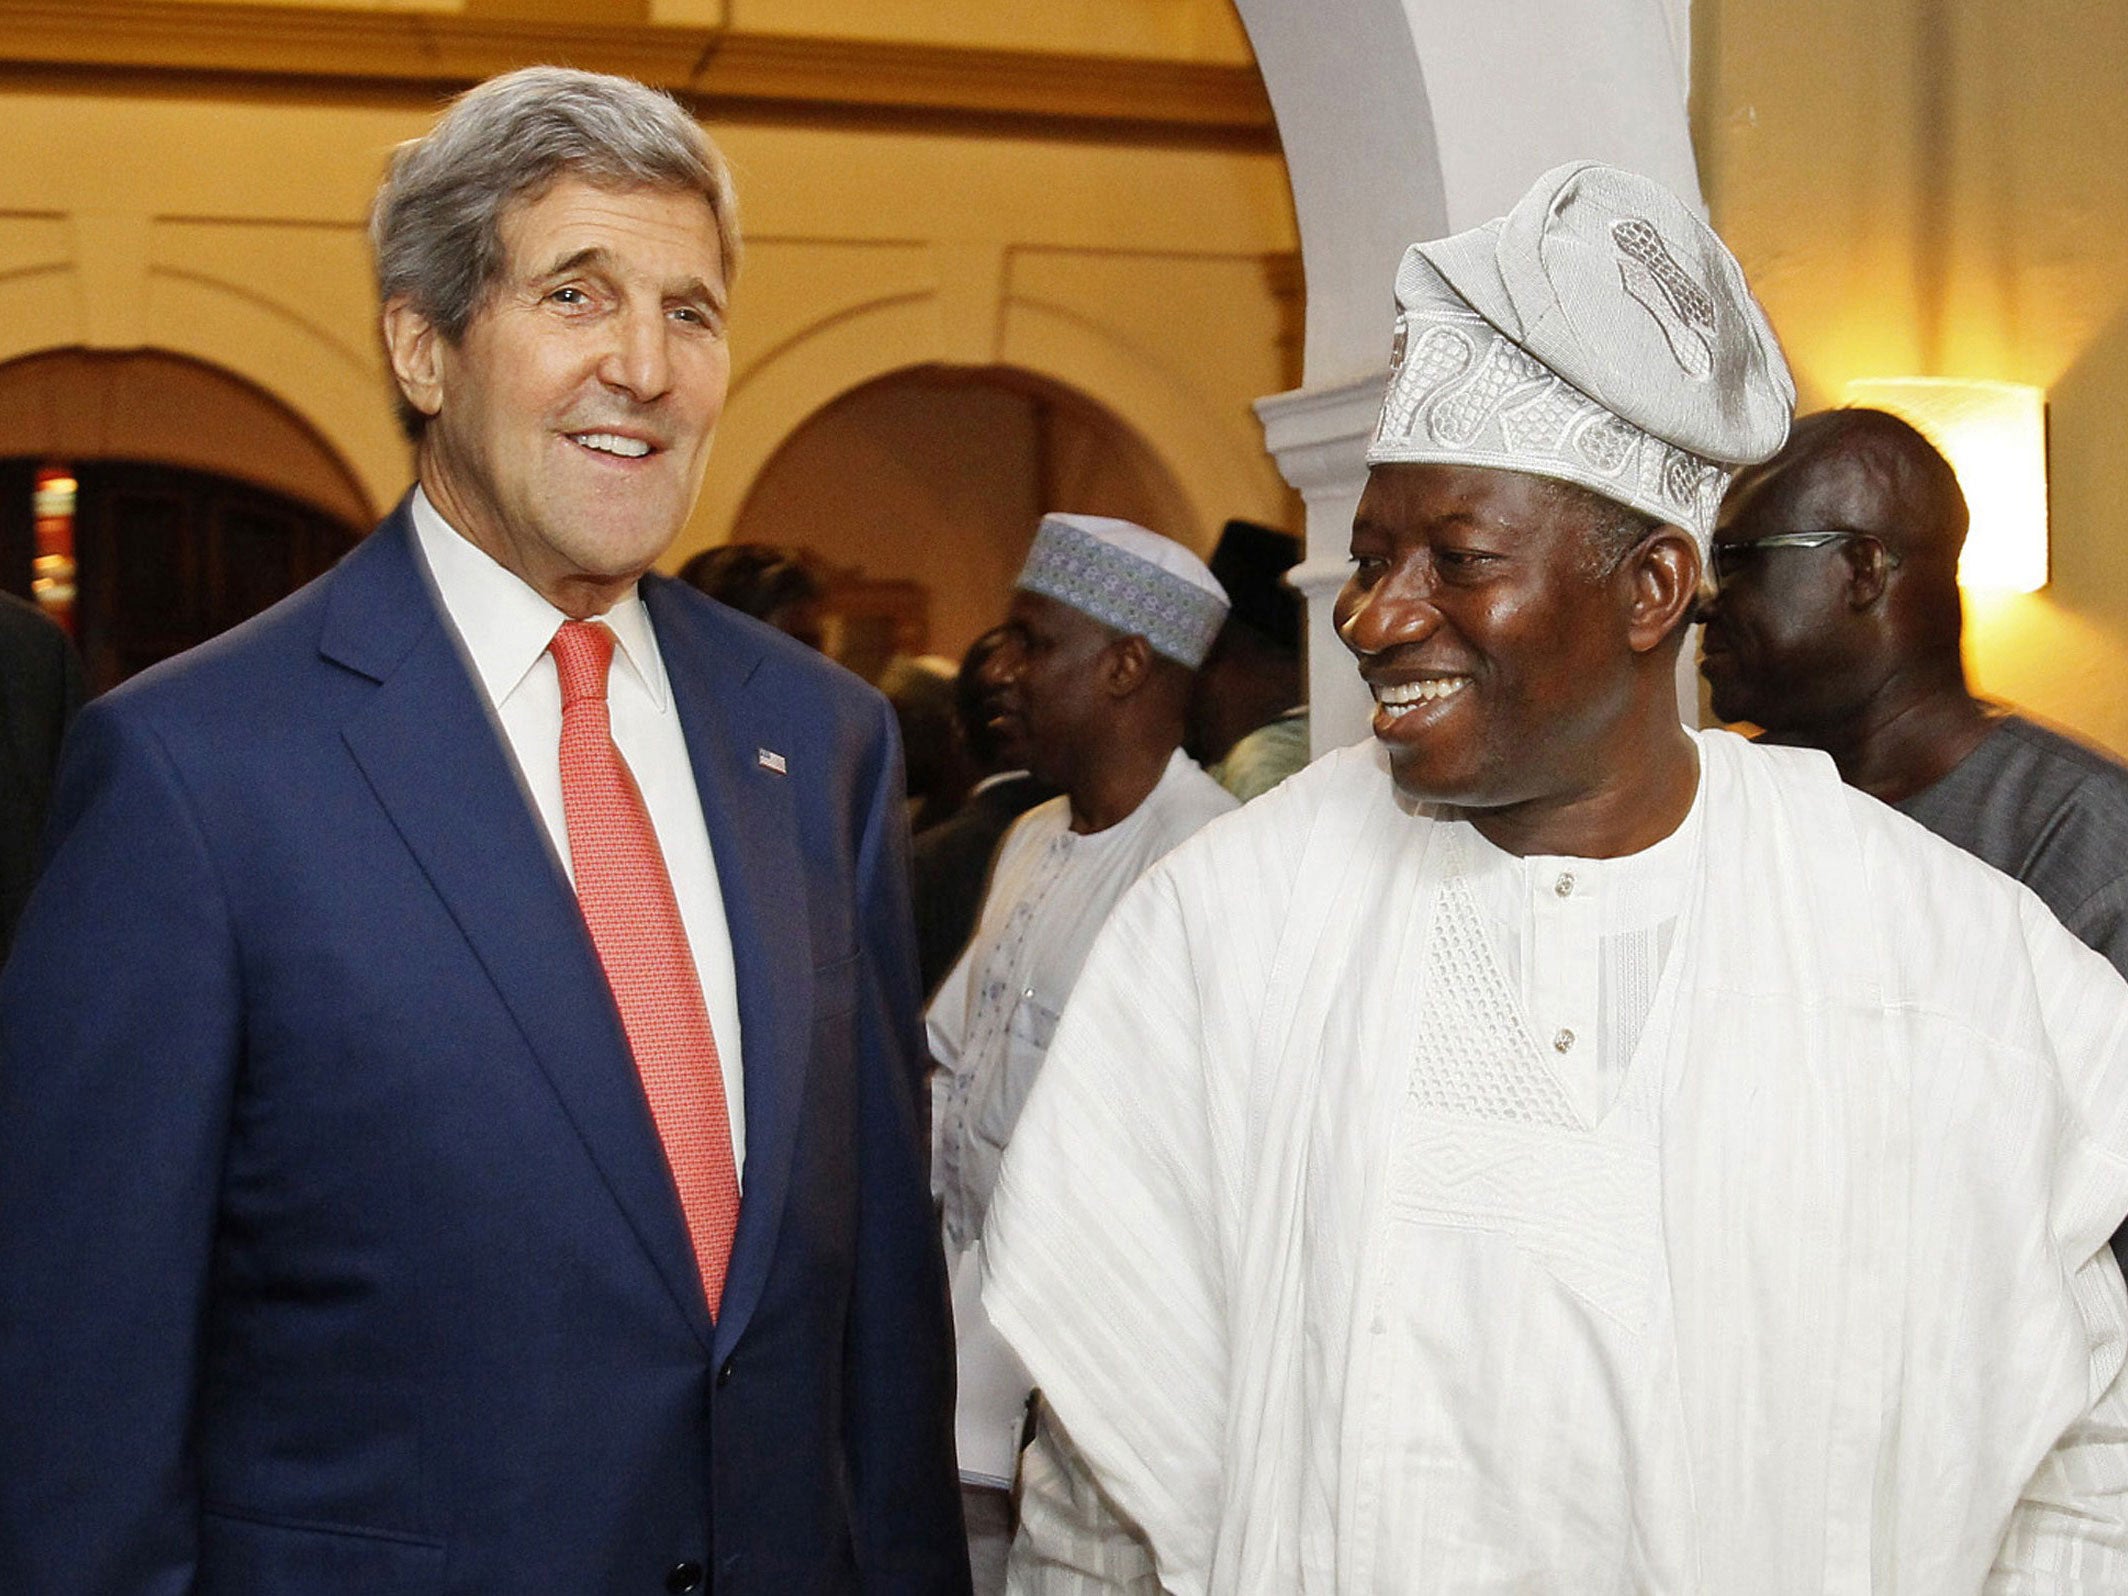 US Secretary of State John Kerry meets with Nigeria's President Goodluck Jonathan at the State House in Lagos